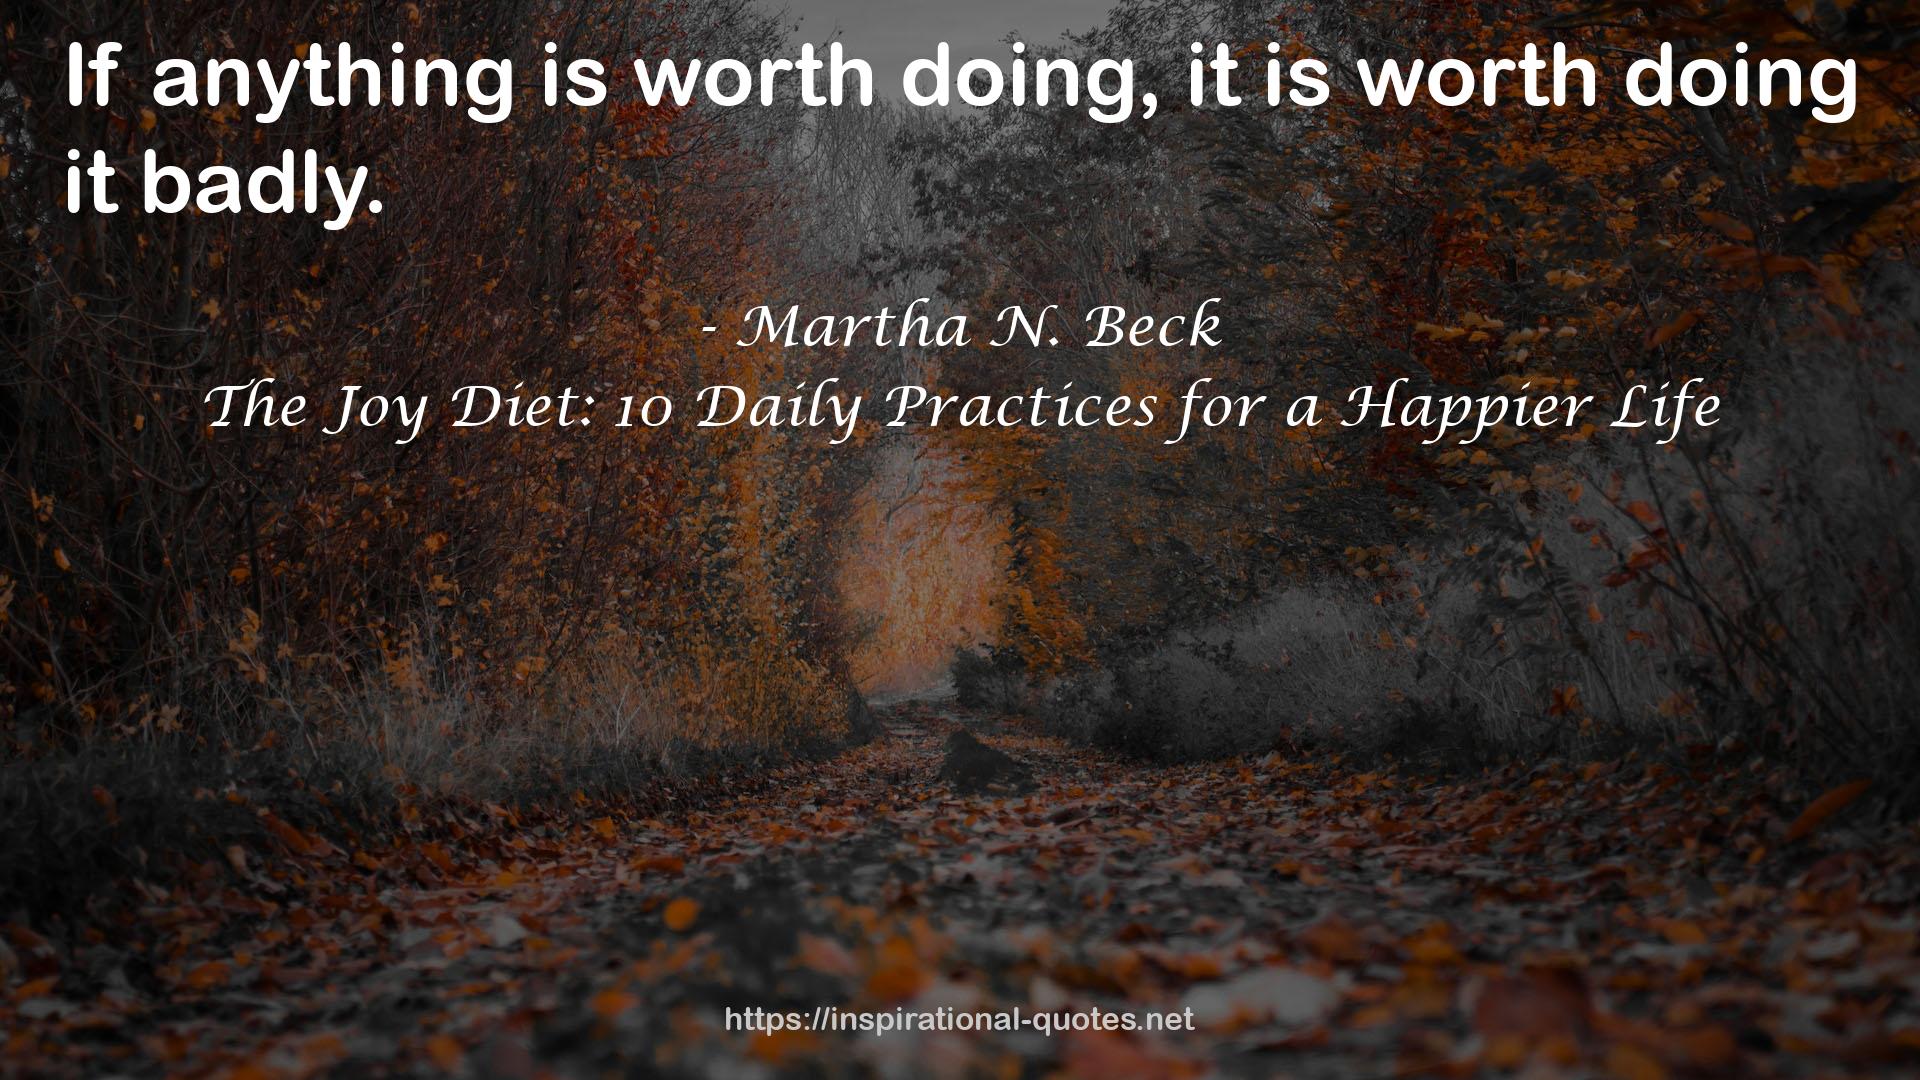 The Joy Diet: 10 Daily Practices for a Happier Life QUOTES